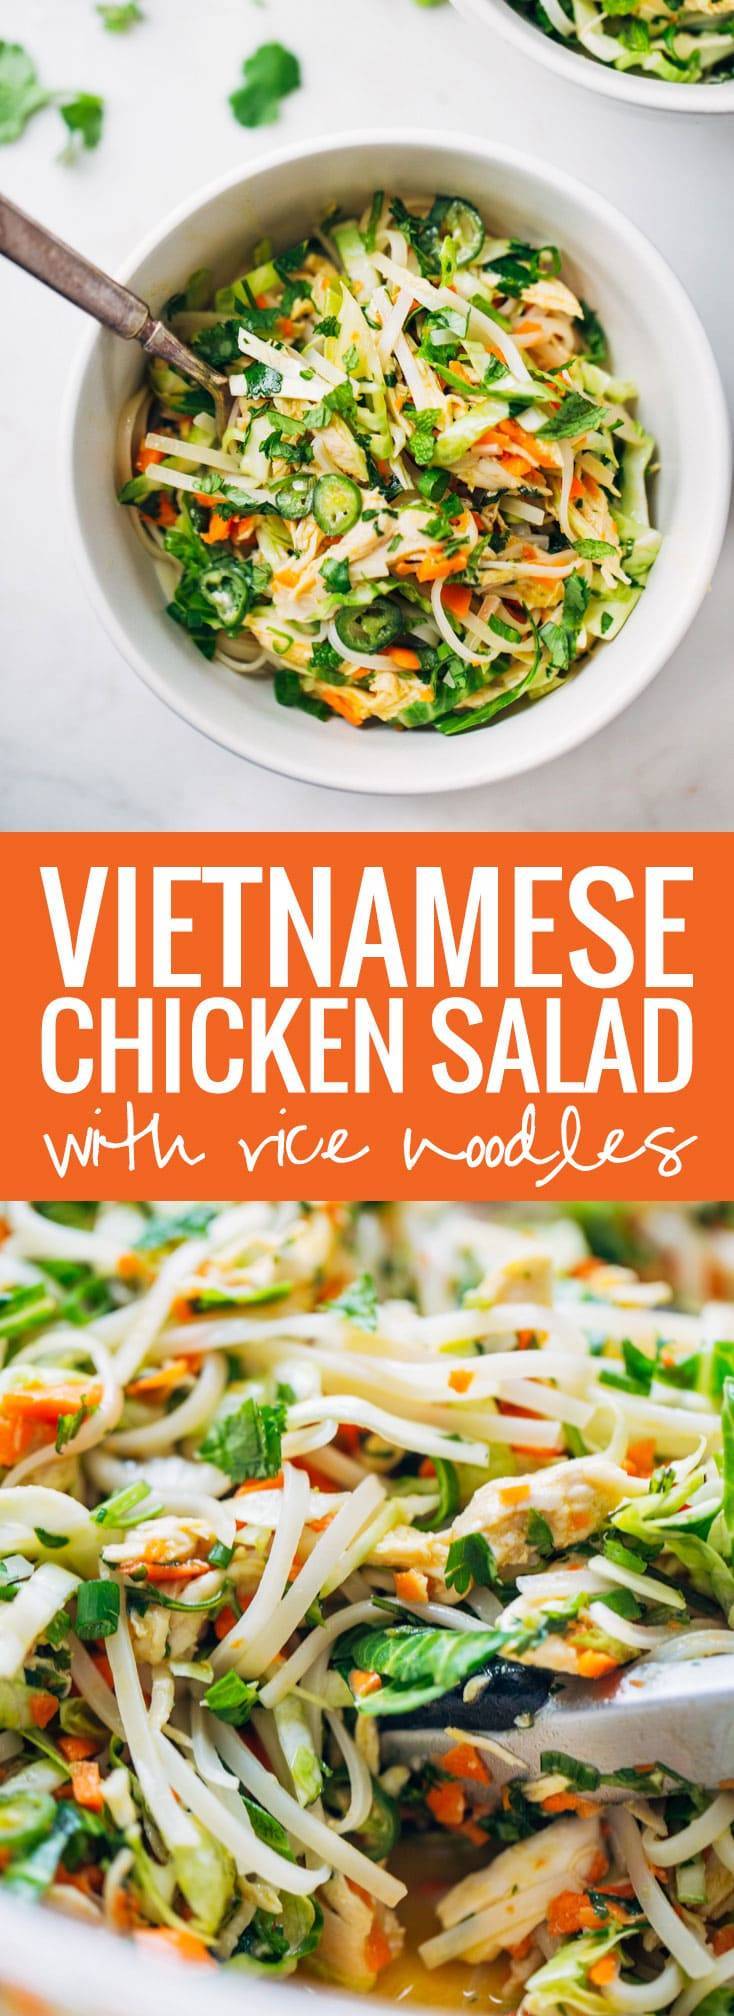 Vietnamese Chicken Salad with Rice Noodles made with chicken, cabbage, carrots, lime, mint, cilantro, and a tangy homemade dressing. 370 calories and SO good!